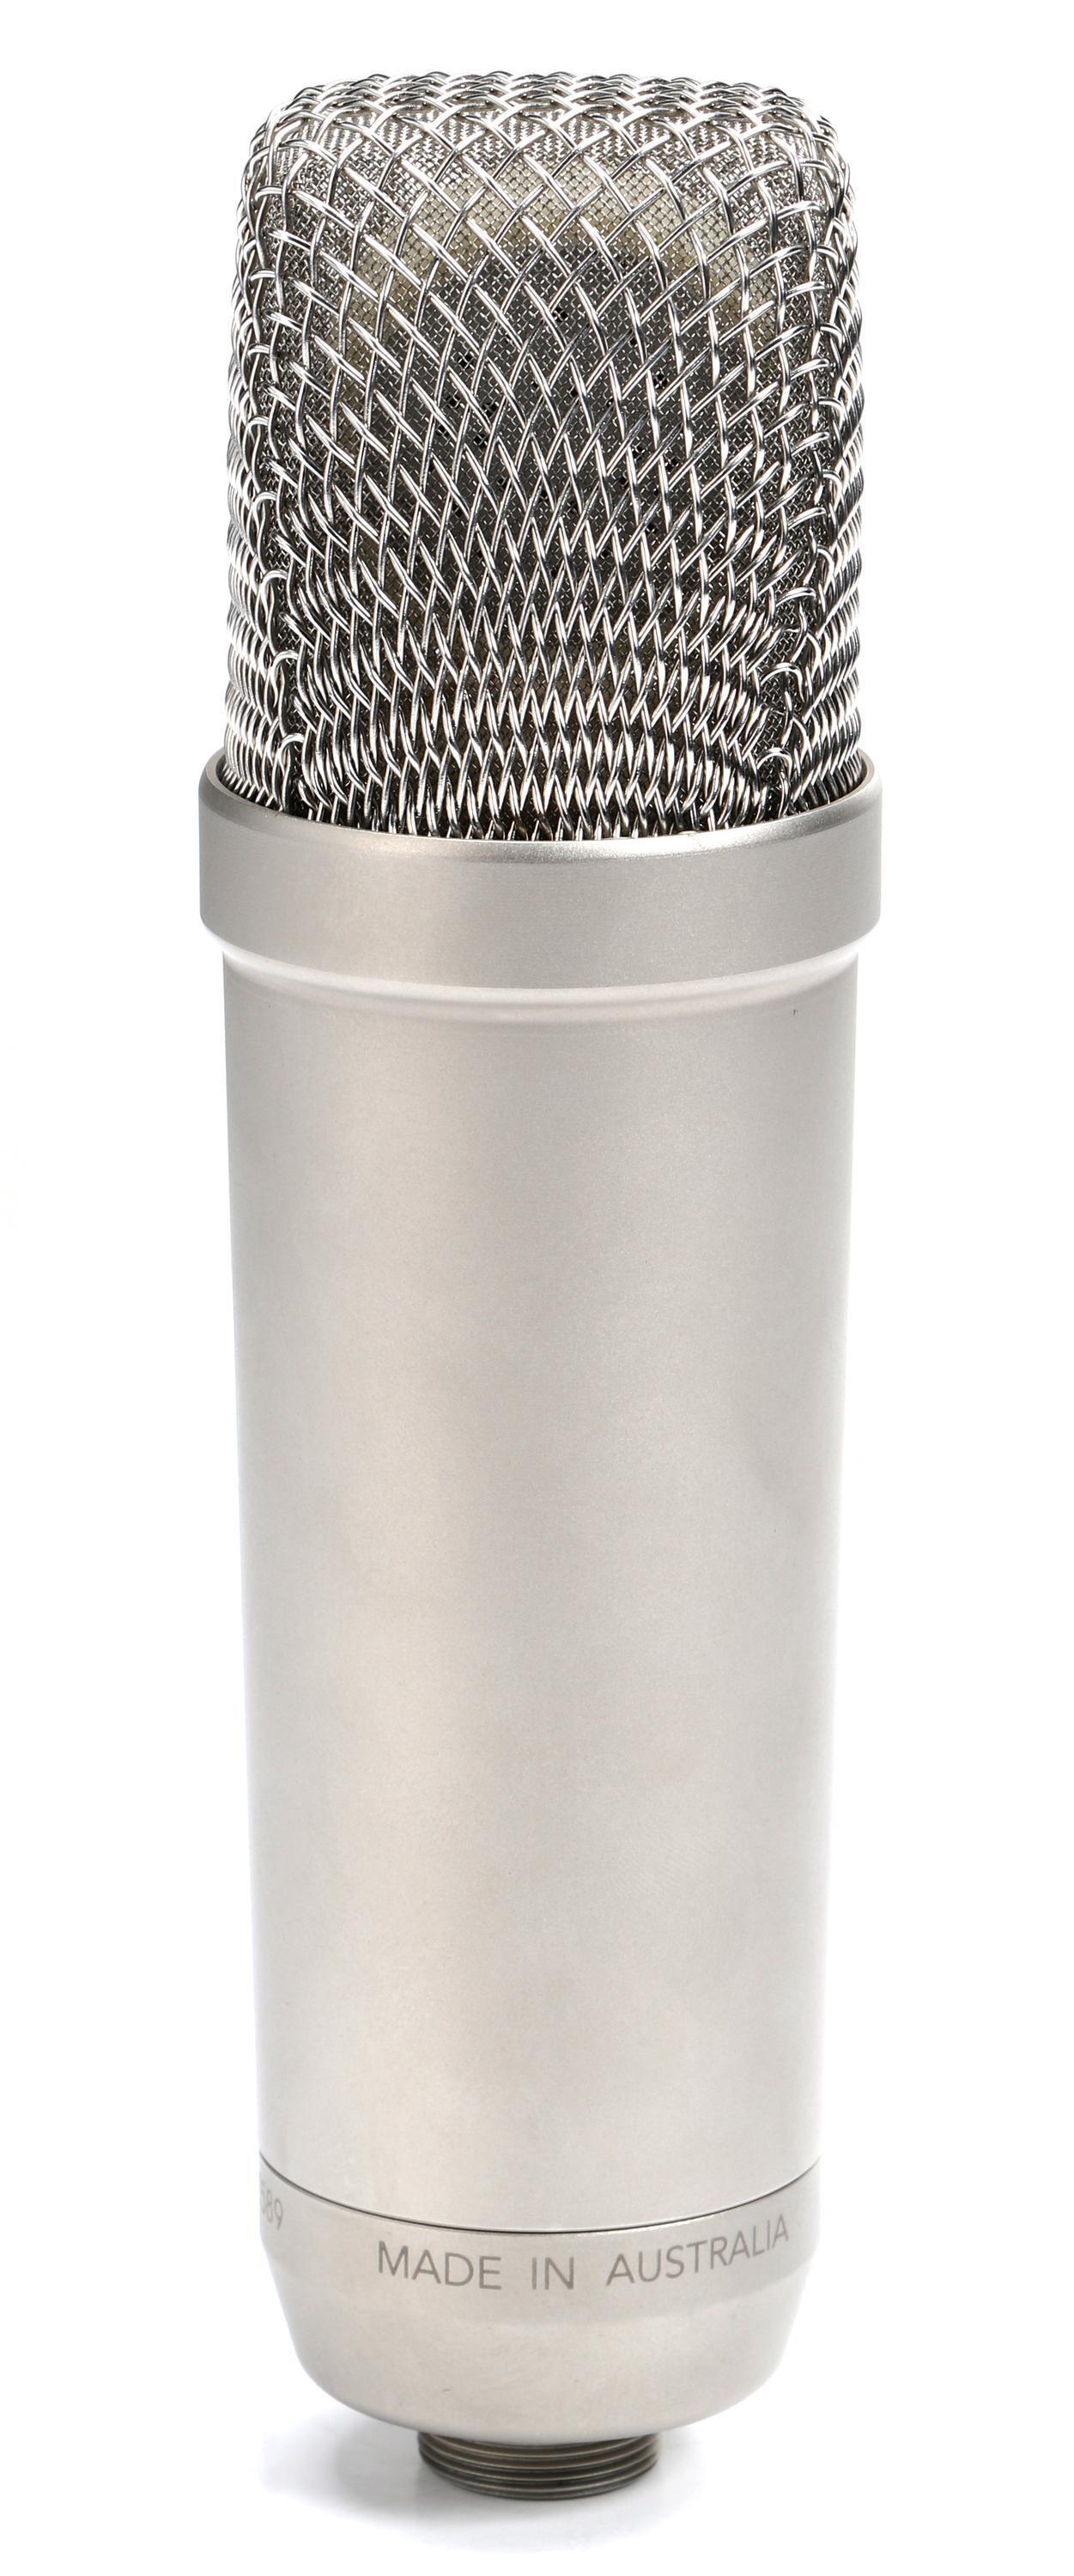 Rode NT1-A Large-diaphragm Condenser Microphone